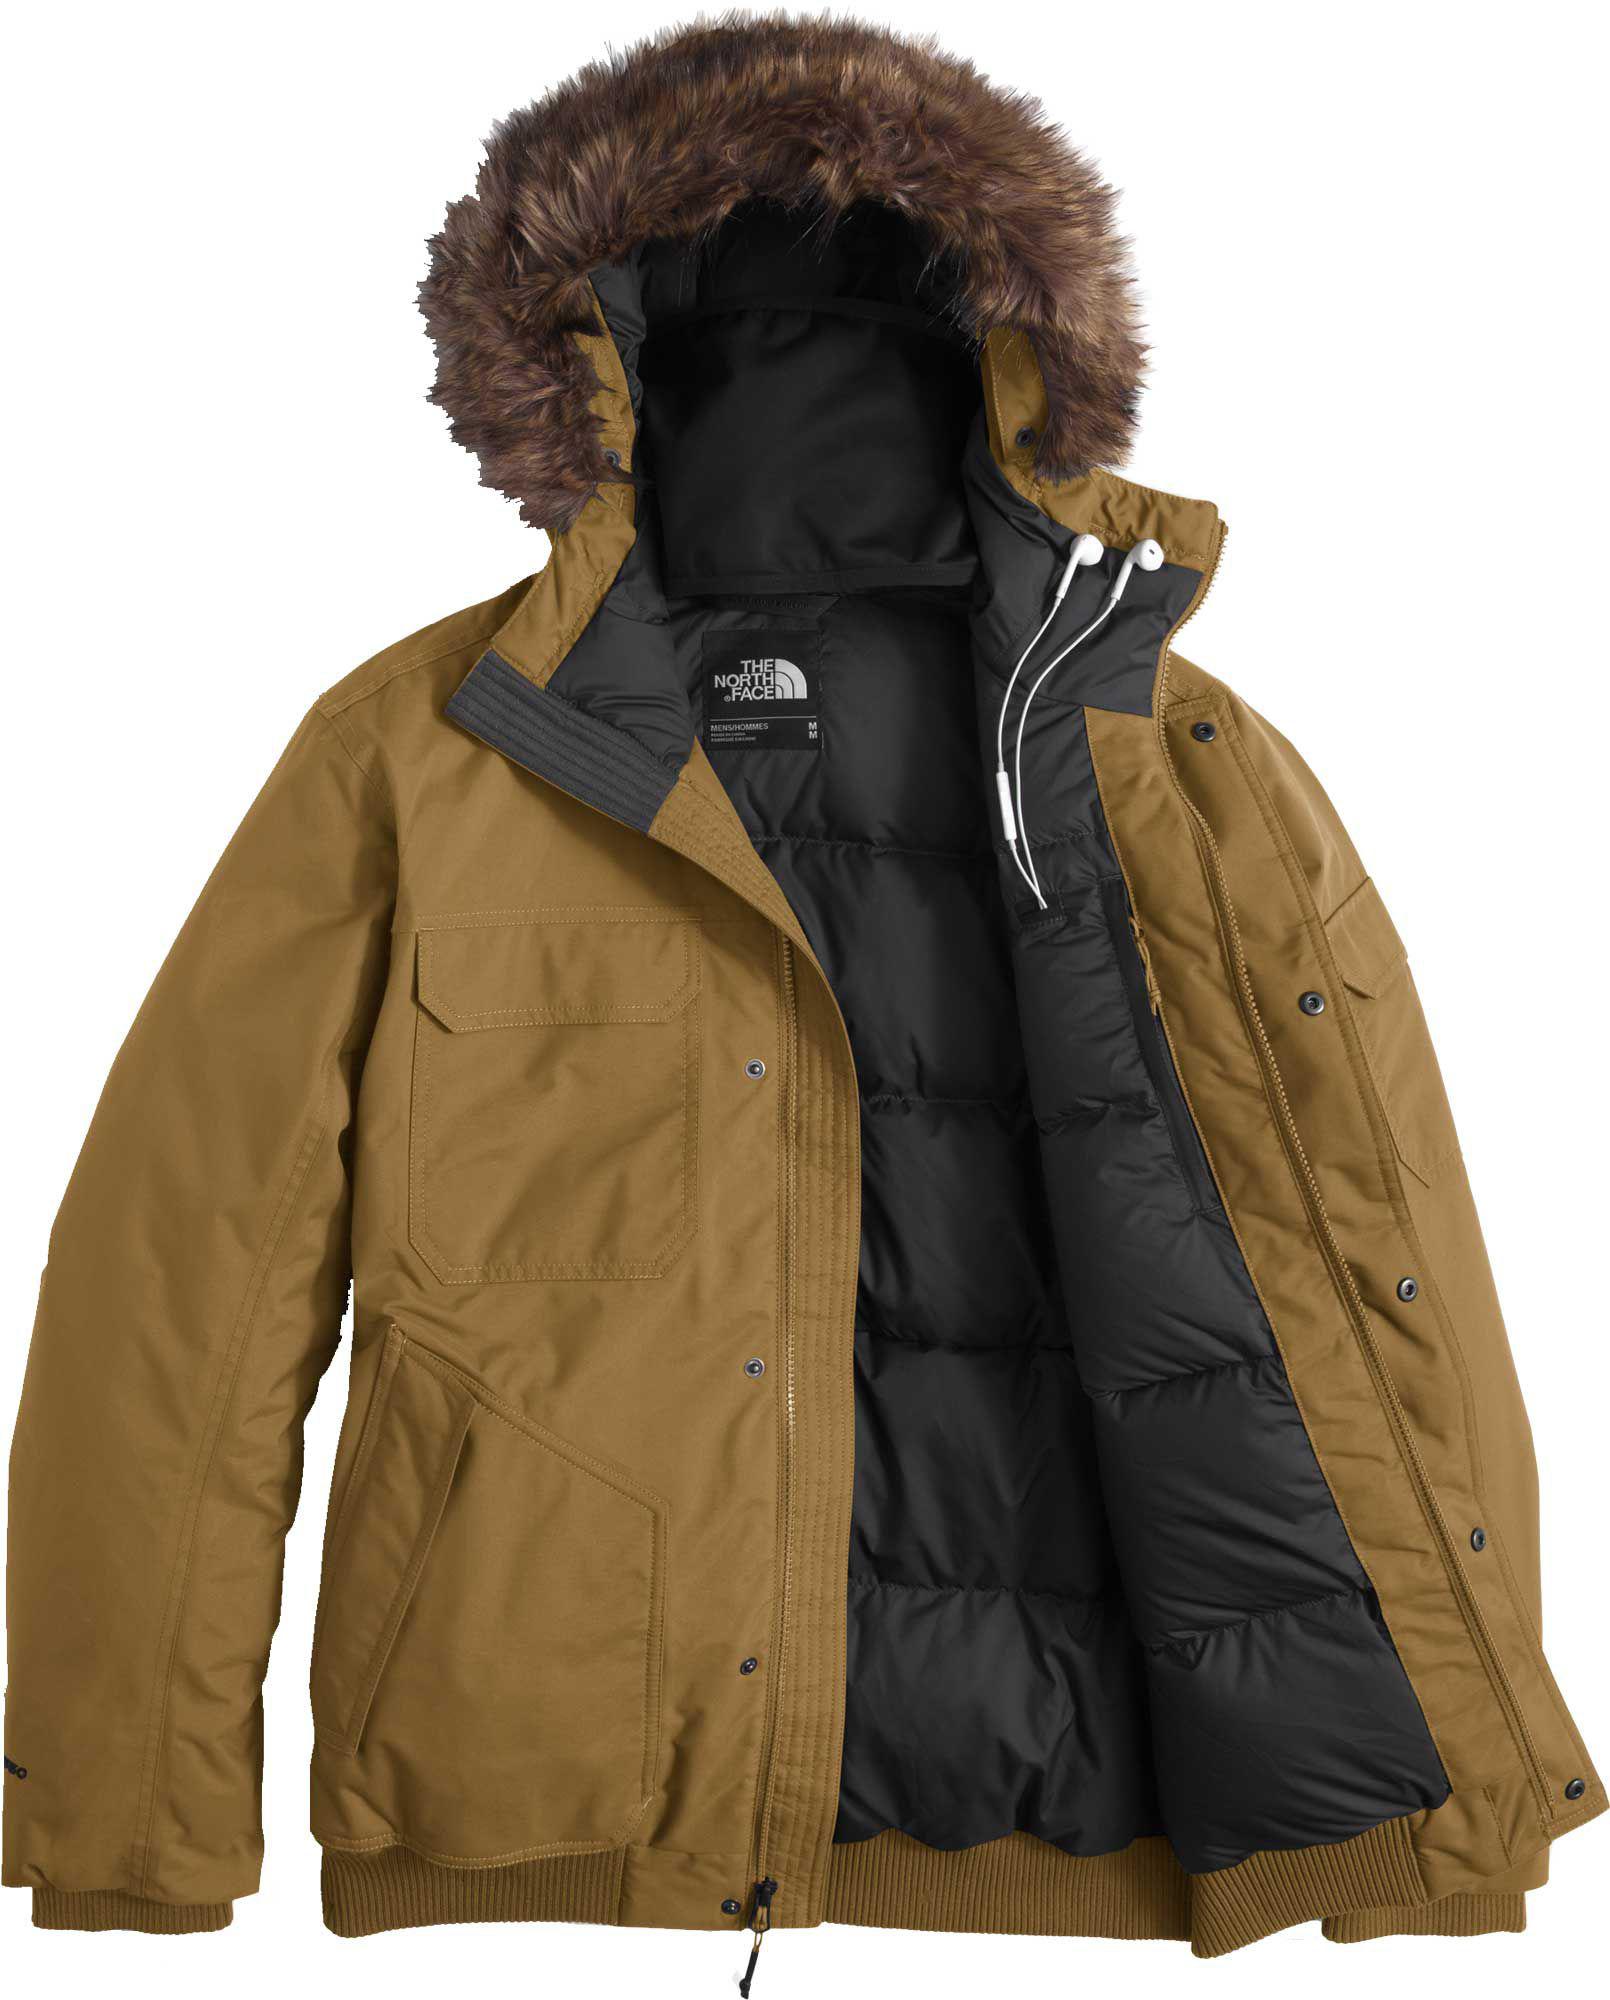 The North Face Gotham Iii Down Jacket in Green for Men - Lyst